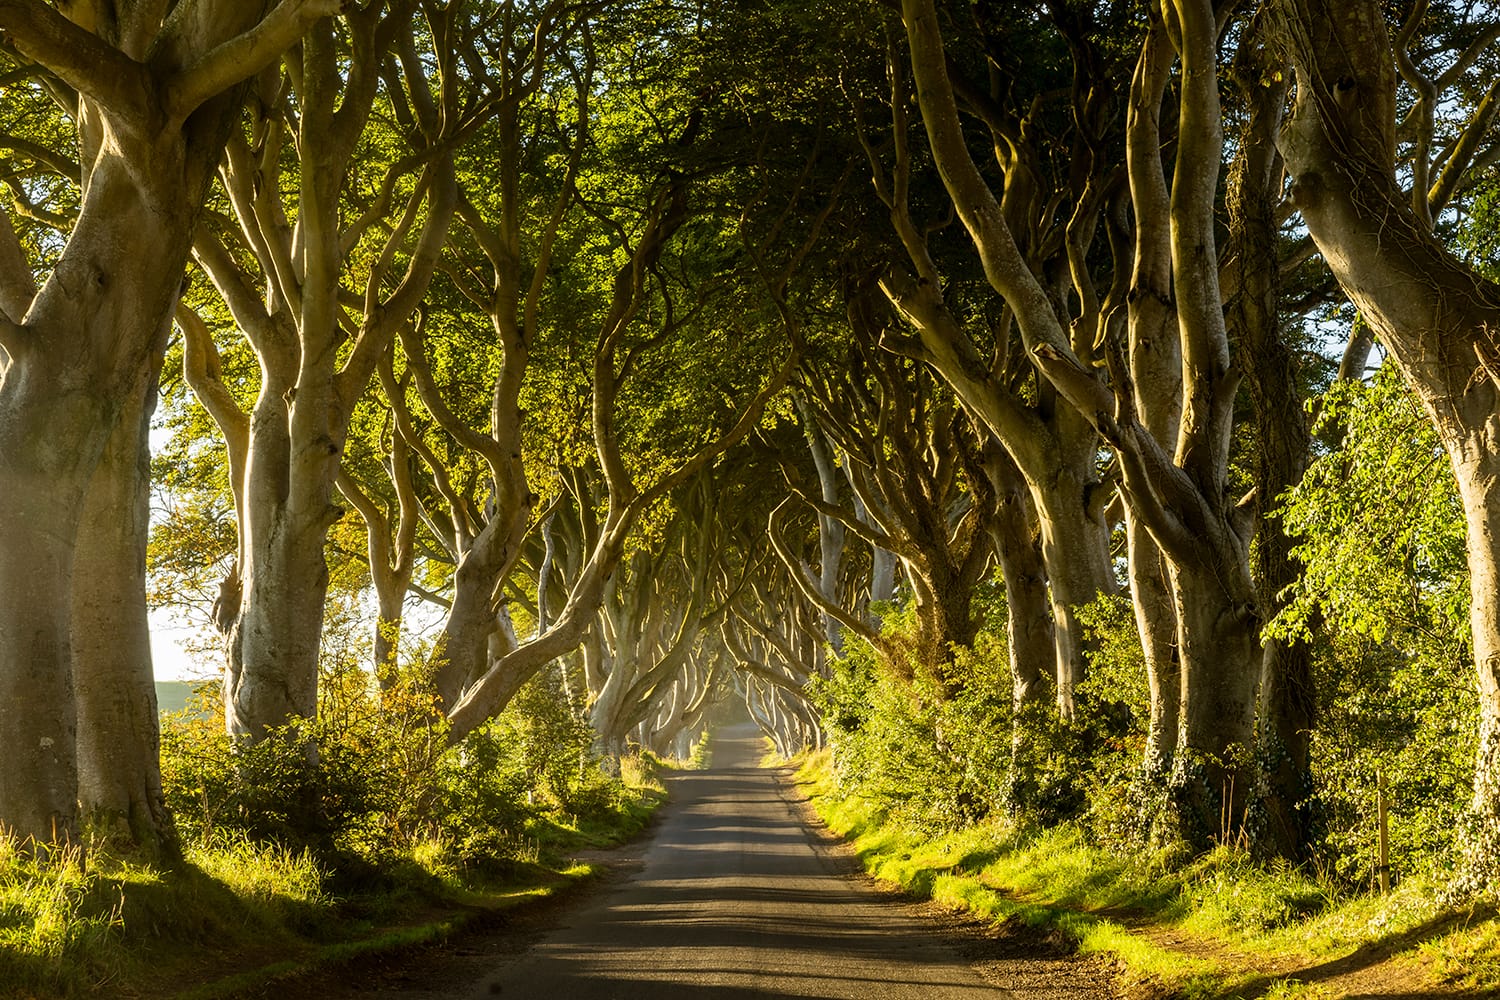 A road runs through the Dark Hedges tree tunnel at sunrise in Northern Ireland, UK